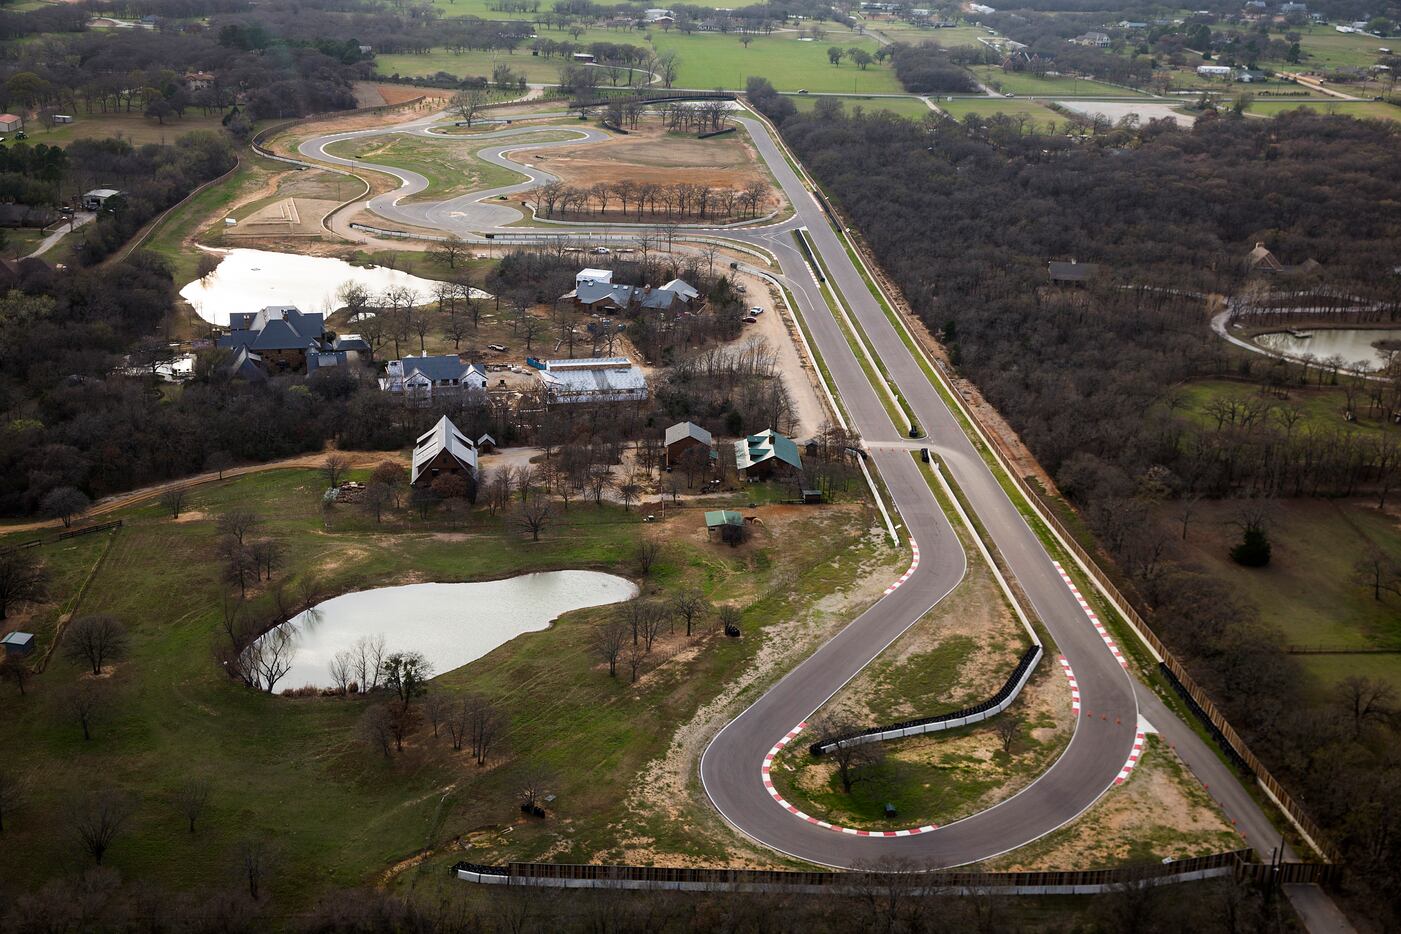 The site of the Toyota executive retreat in Denton County includes a racetrack and buildings...